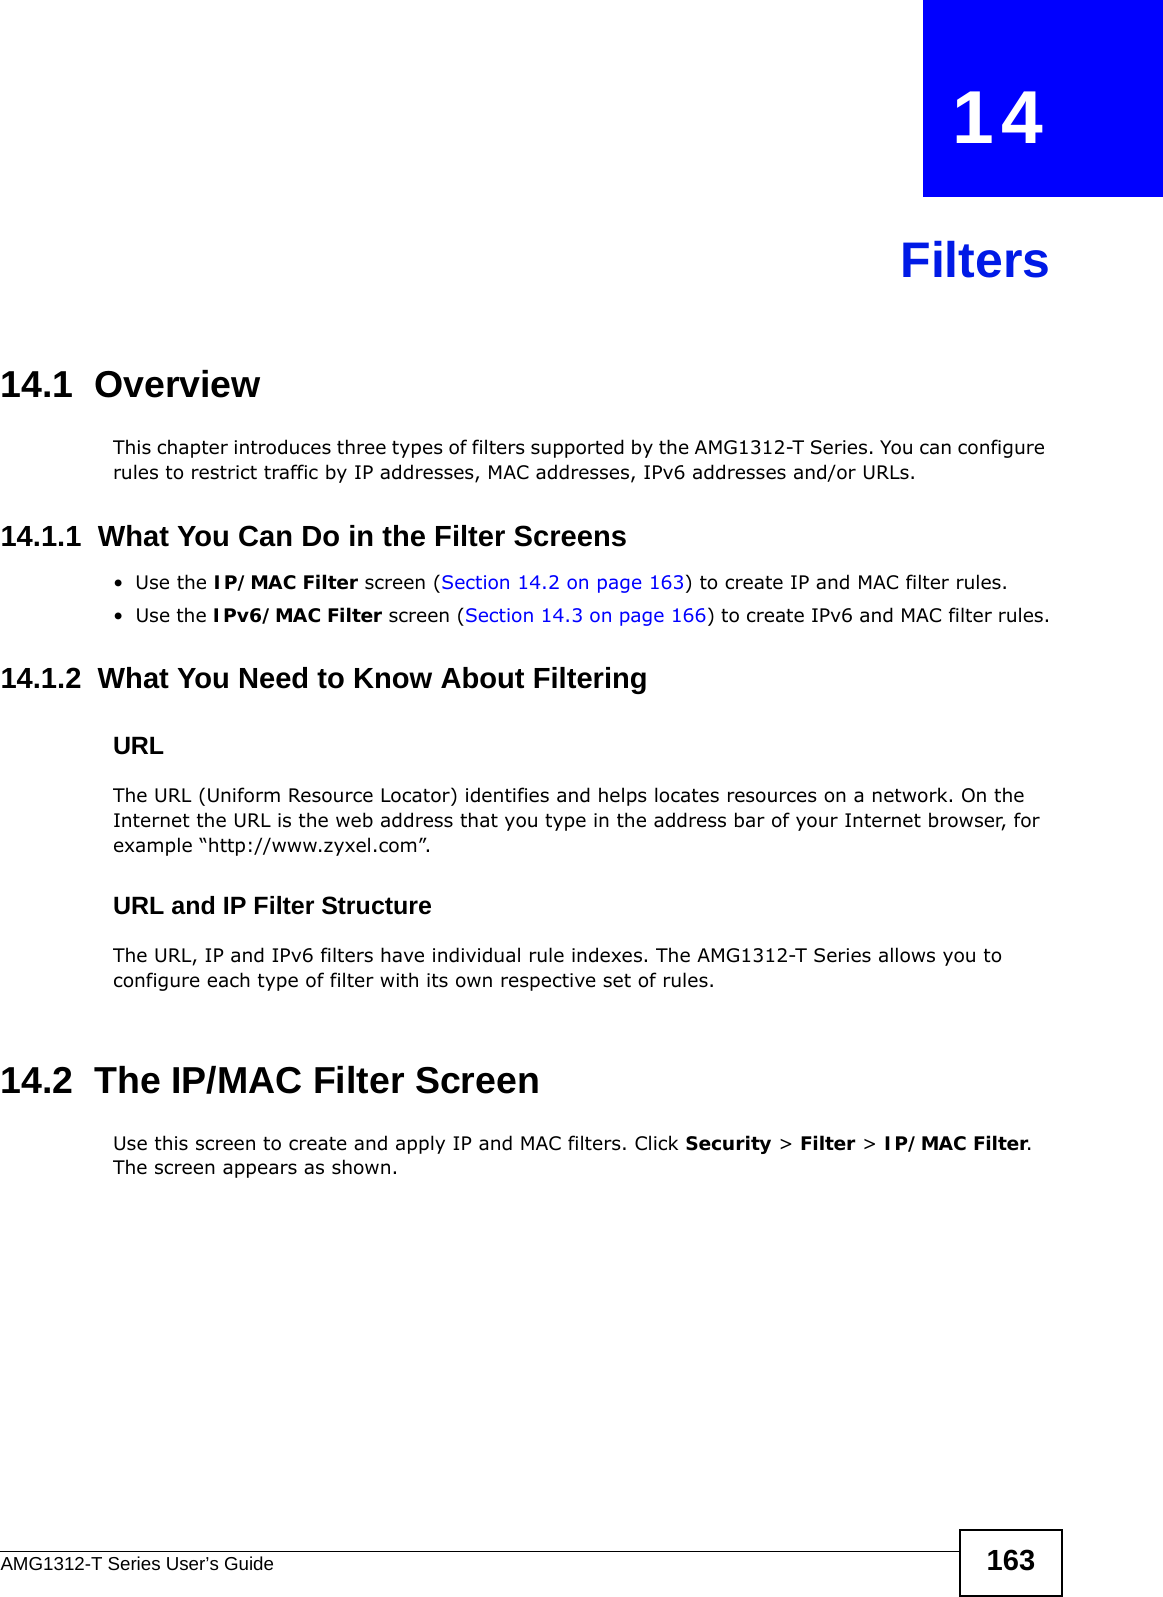 AMG1312-T Series User’s Guide 163CHAPTER   14Filters14.1  Overview This chapter introduces three types of filters supported by the AMG1312-T Series. You can configure rules to restrict traffic by IP addresses, MAC addresses, IPv6 addresses and/or URLs.14.1.1  What You Can Do in the Filter Screens•Use the IP/MAC Filter screen (Section 14.2 on page 163) to create IP and MAC filter rules.•Use the IPv6/MAC Filter screen (Section 14.3 on page 166) to create IPv6 and MAC filter rules.14.1.2  What You Need to Know About FilteringURLThe URL (Uniform Resource Locator) identifies and helps locates resources on a network. On the Internet the URL is the web address that you type in the address bar of your Internet browser, for example “http://www.zyxel.com”.URL and IP Filter StructureThe URL, IP and IPv6 filters have individual rule indexes. The AMG1312-T Series allows you to configure each type of filter with its own respective set of rules. 14.2  The IP/MAC Filter ScreenUse this screen to create and apply IP and MAC filters. Click Security &gt; Filter &gt; IP/MAC Filter. The screen appears as shown.